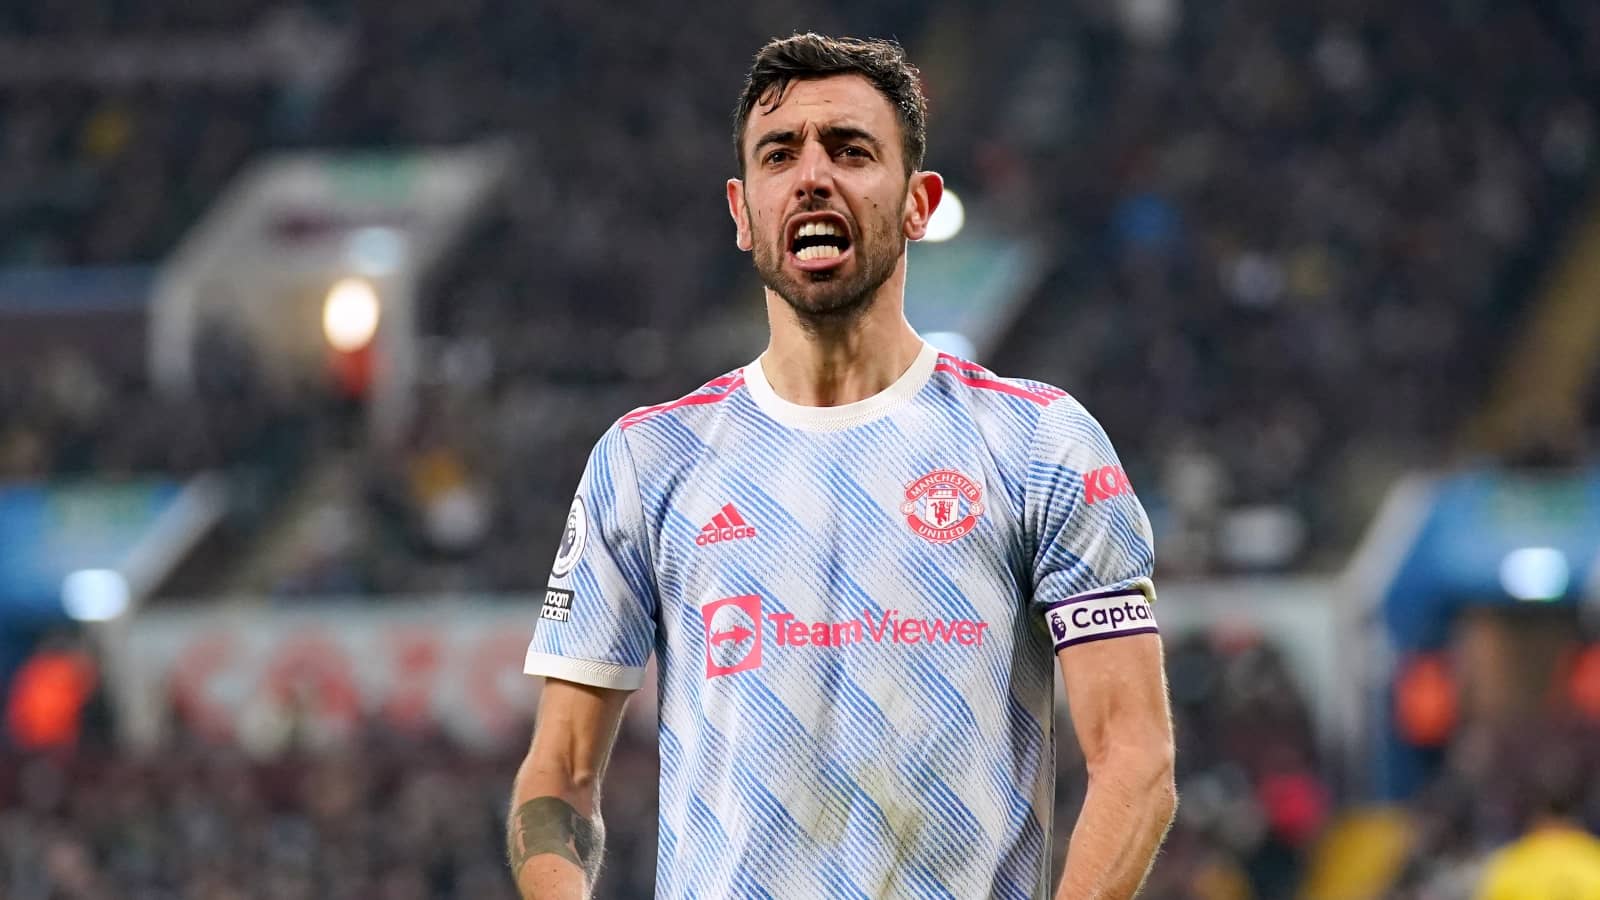 Bruno Fernandes Signs 4-years New Contract At Manchester United